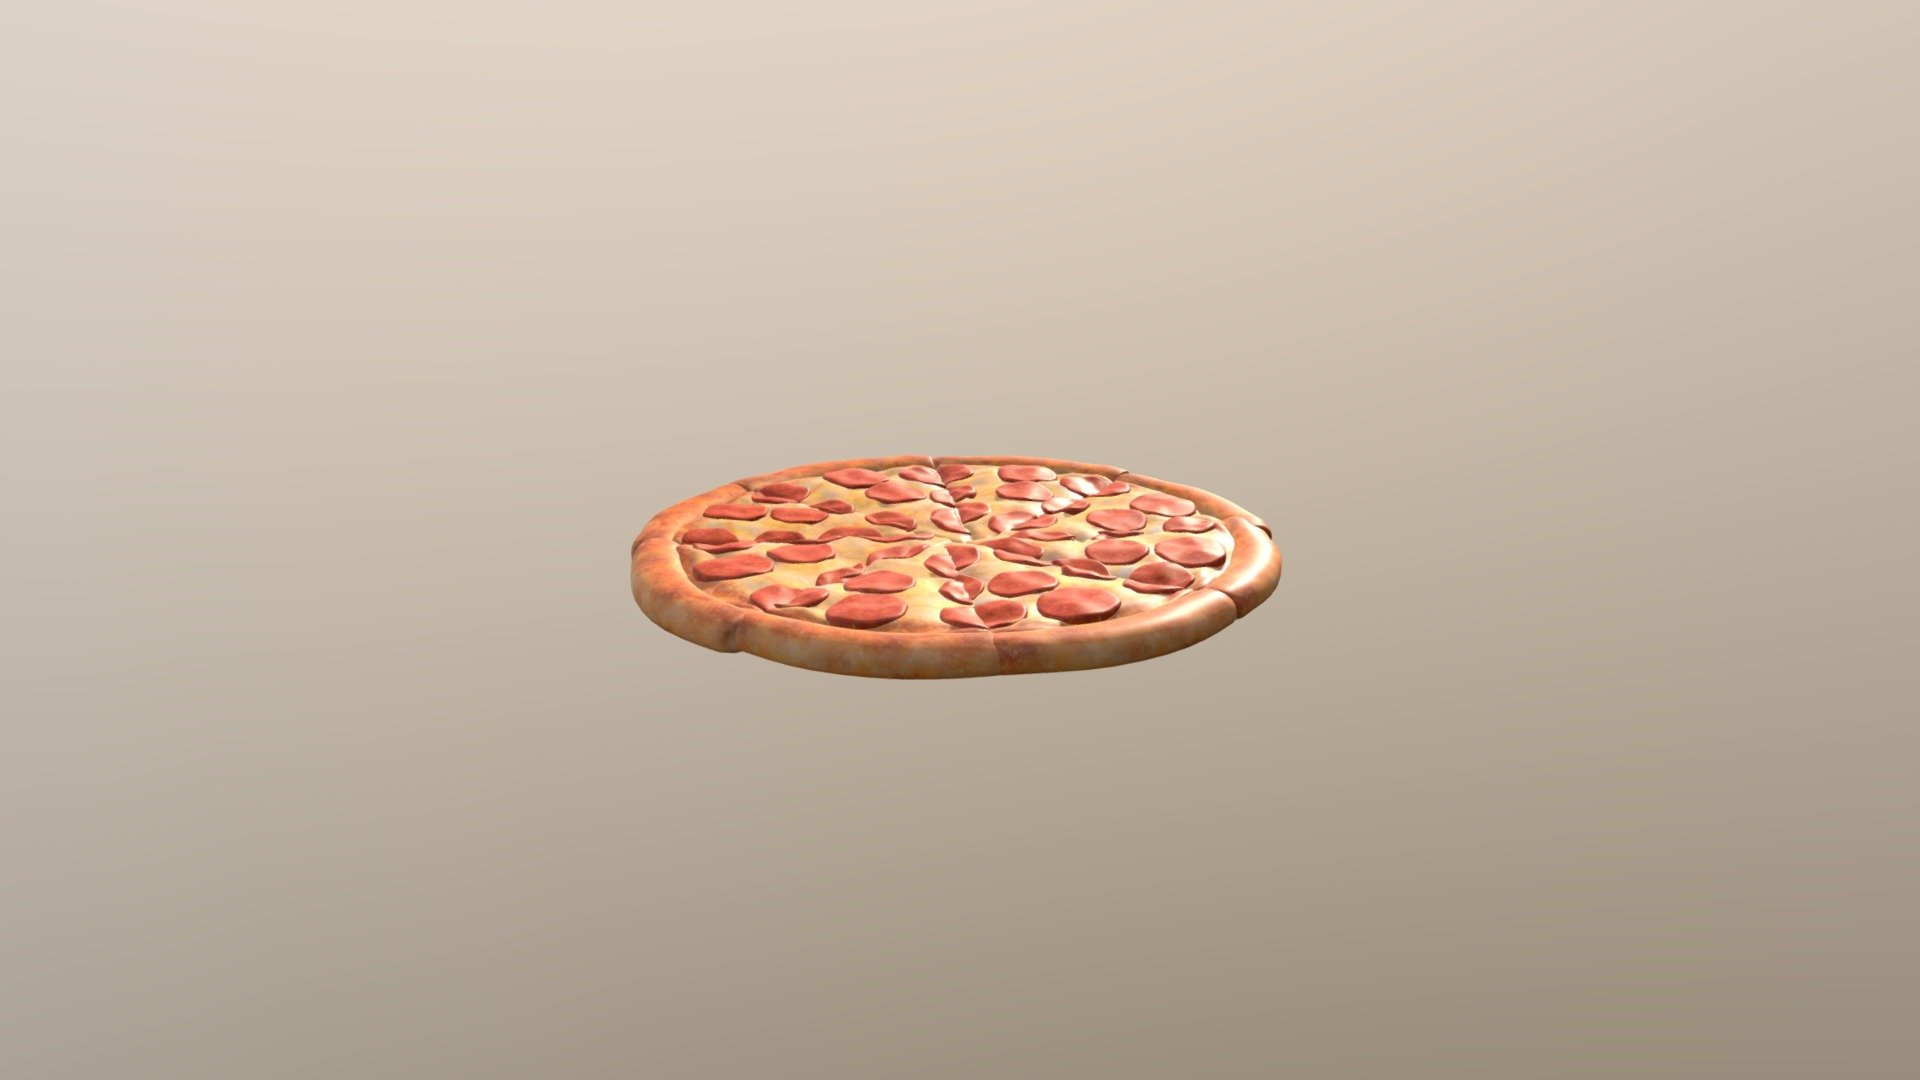 This is a 3d Model of A whole Pizza that can be split into 3D slices-Pizza  It's a fun model for any food  project  enjoy!
    all 3D files are available upon request ( just shoot an email to the artis)
Pizza is one of the most popular food items at a party!  Pizza Food 3D Model.
    *recommended 3D Editors
    Blender
    Unity
    Unreal


**Buy Now**
 - Pizza Food 3D Model - Buy Royalty Free 3D model by Jason Lawson (@numonegames) 3d model